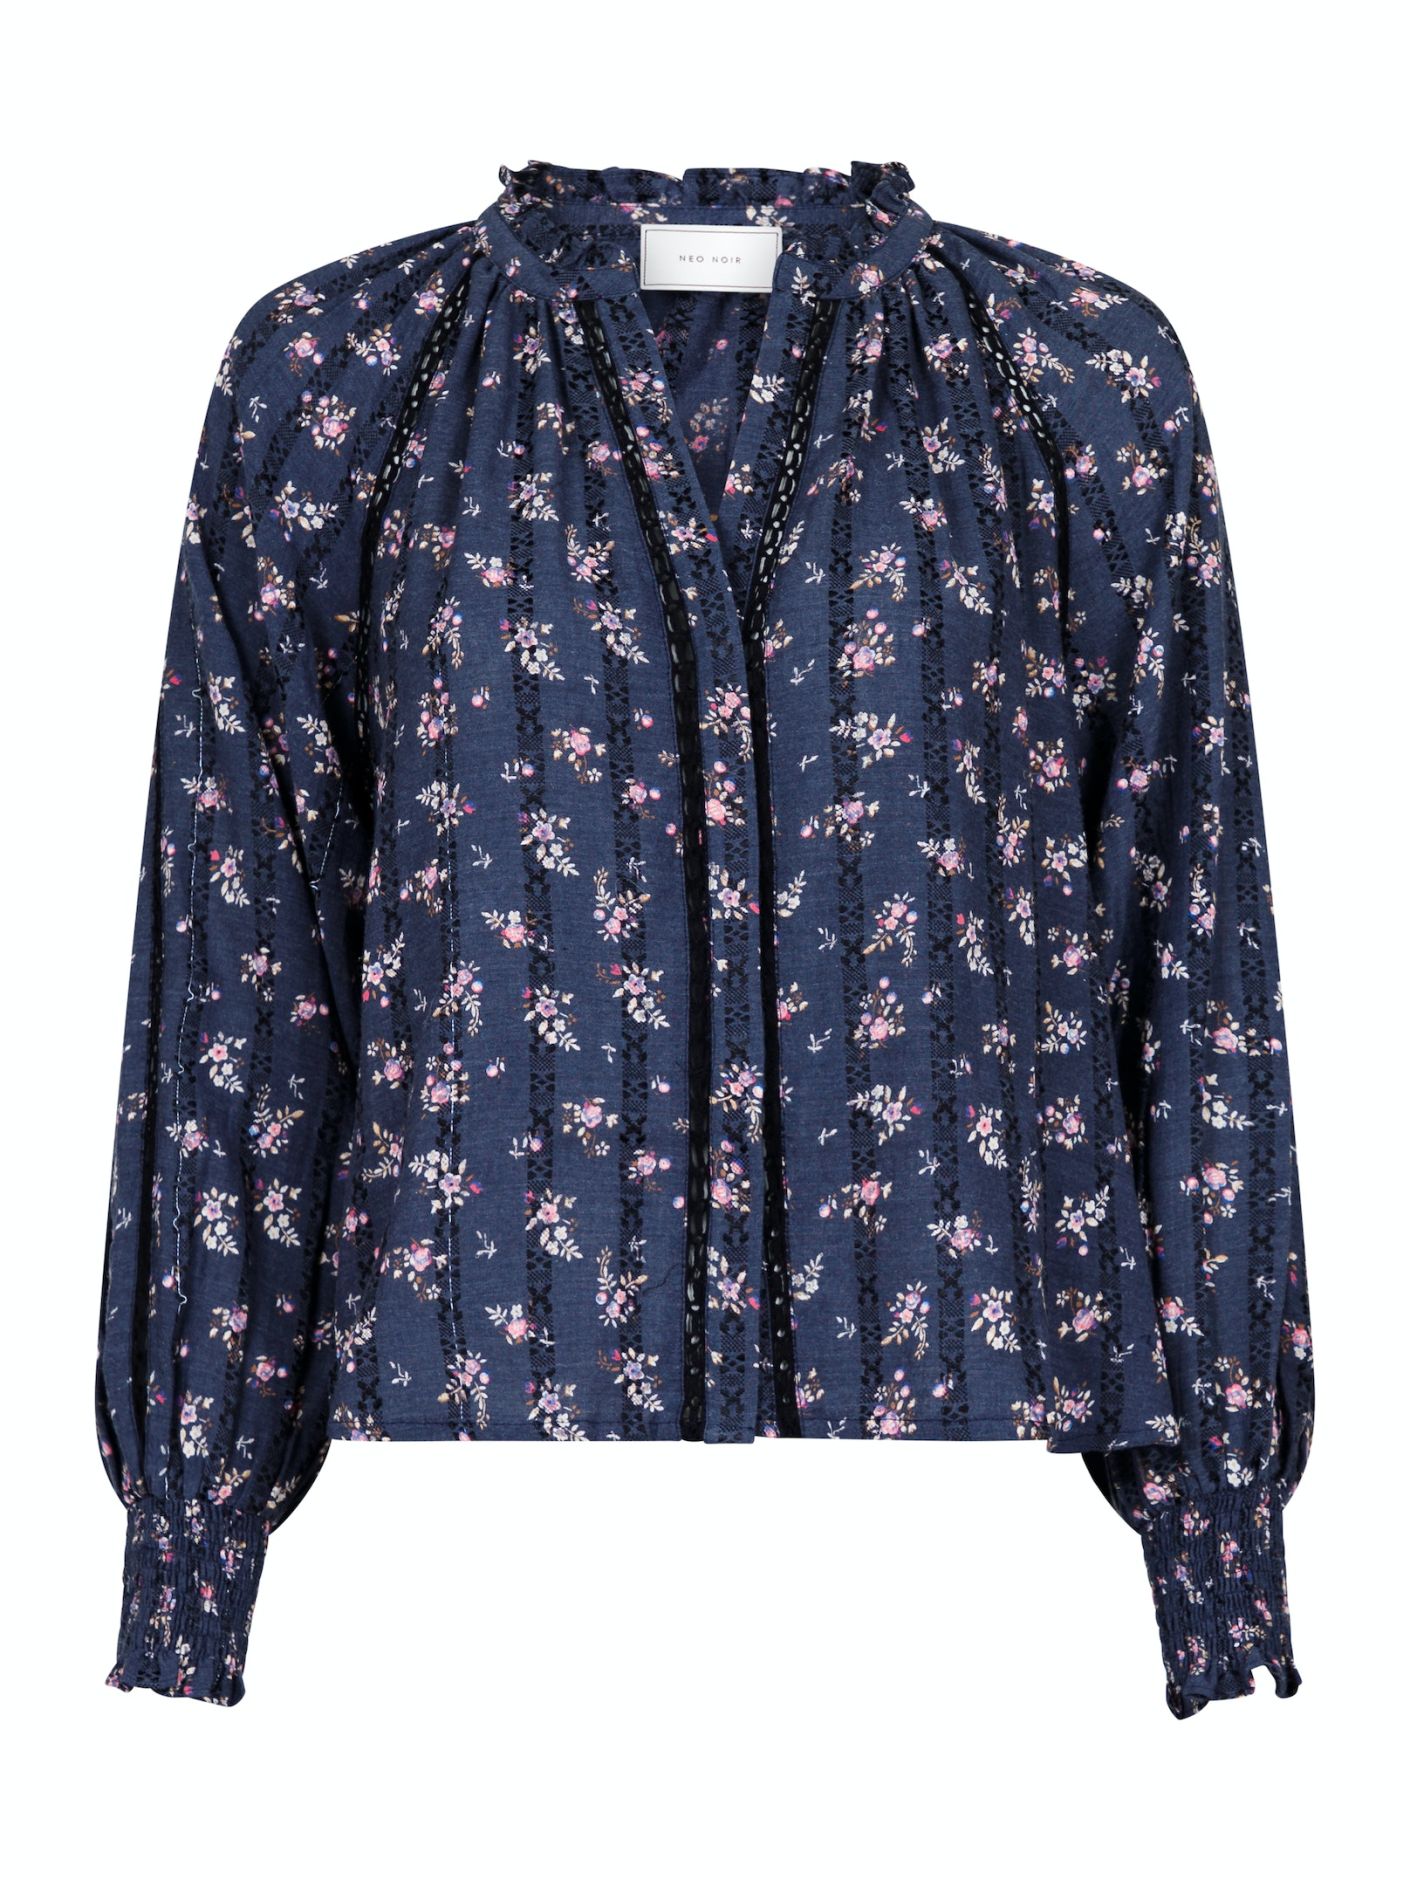 Stimma Delicate Floral Blouse Navy Blue